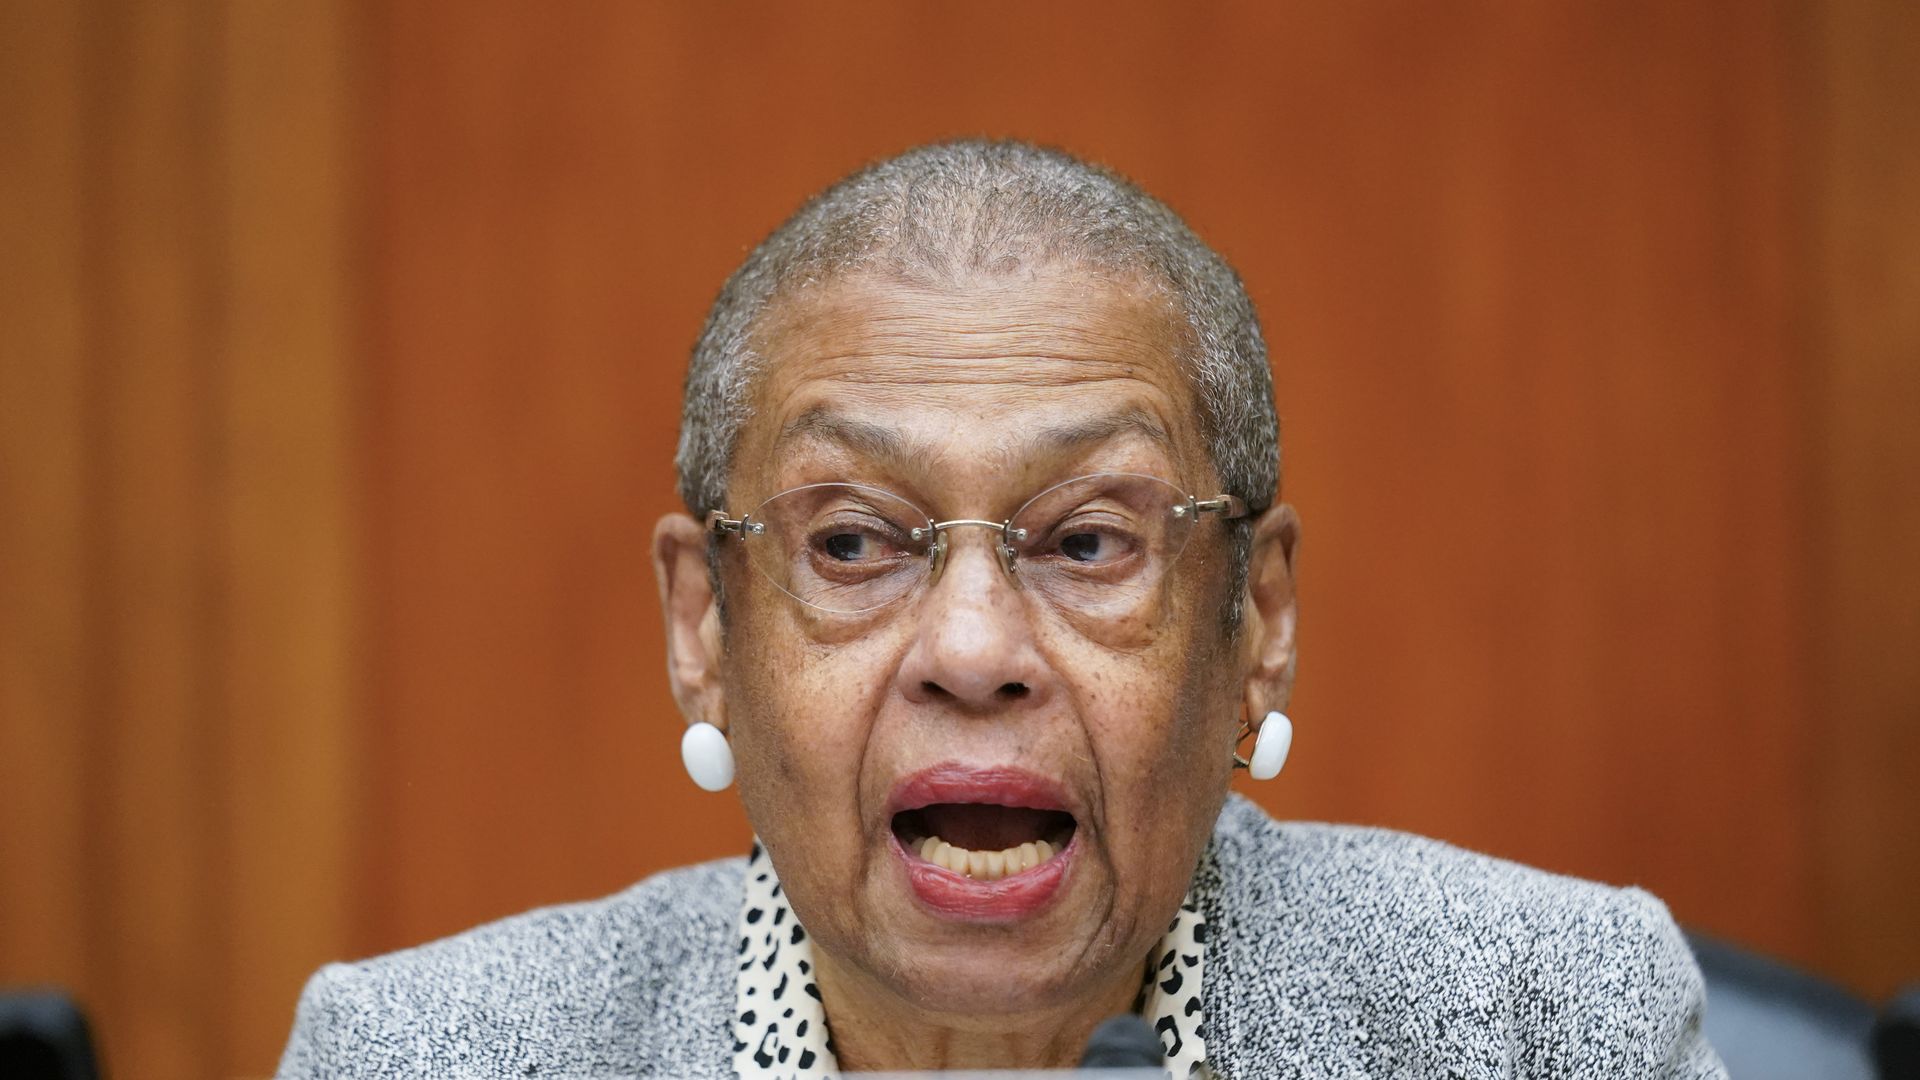 Del. Eleanor Holmes Norton (D-D.C.) speaks during a House Oversight committee hearing on gun violence last June. (Photo by Andrew Harnik-Pool/Getty Images)